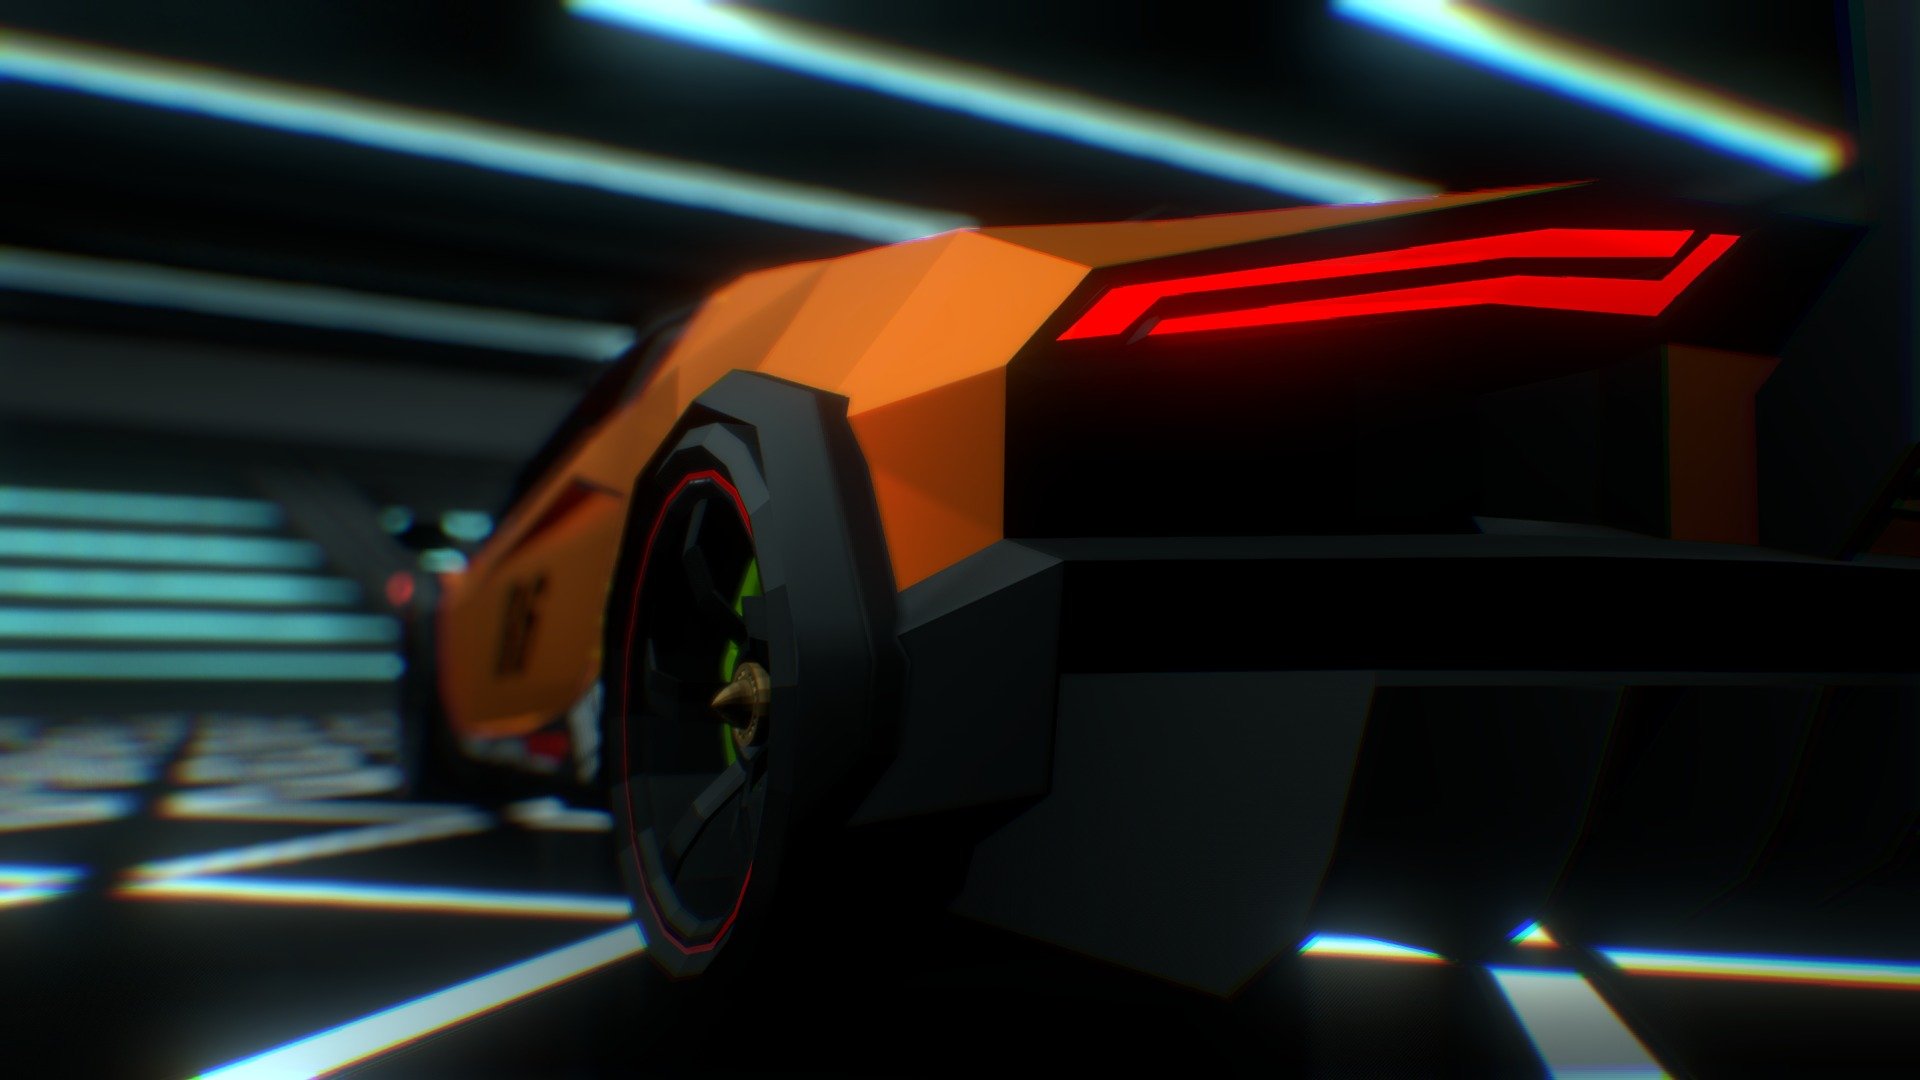 Use VR for more best experience. This scene i made are for VR.
You can download the car model.
heres the link:https://skfb.ly/o6GOp - Futuristic Garage - 3D model by the 86 guy (@the_86_guy) 3d model